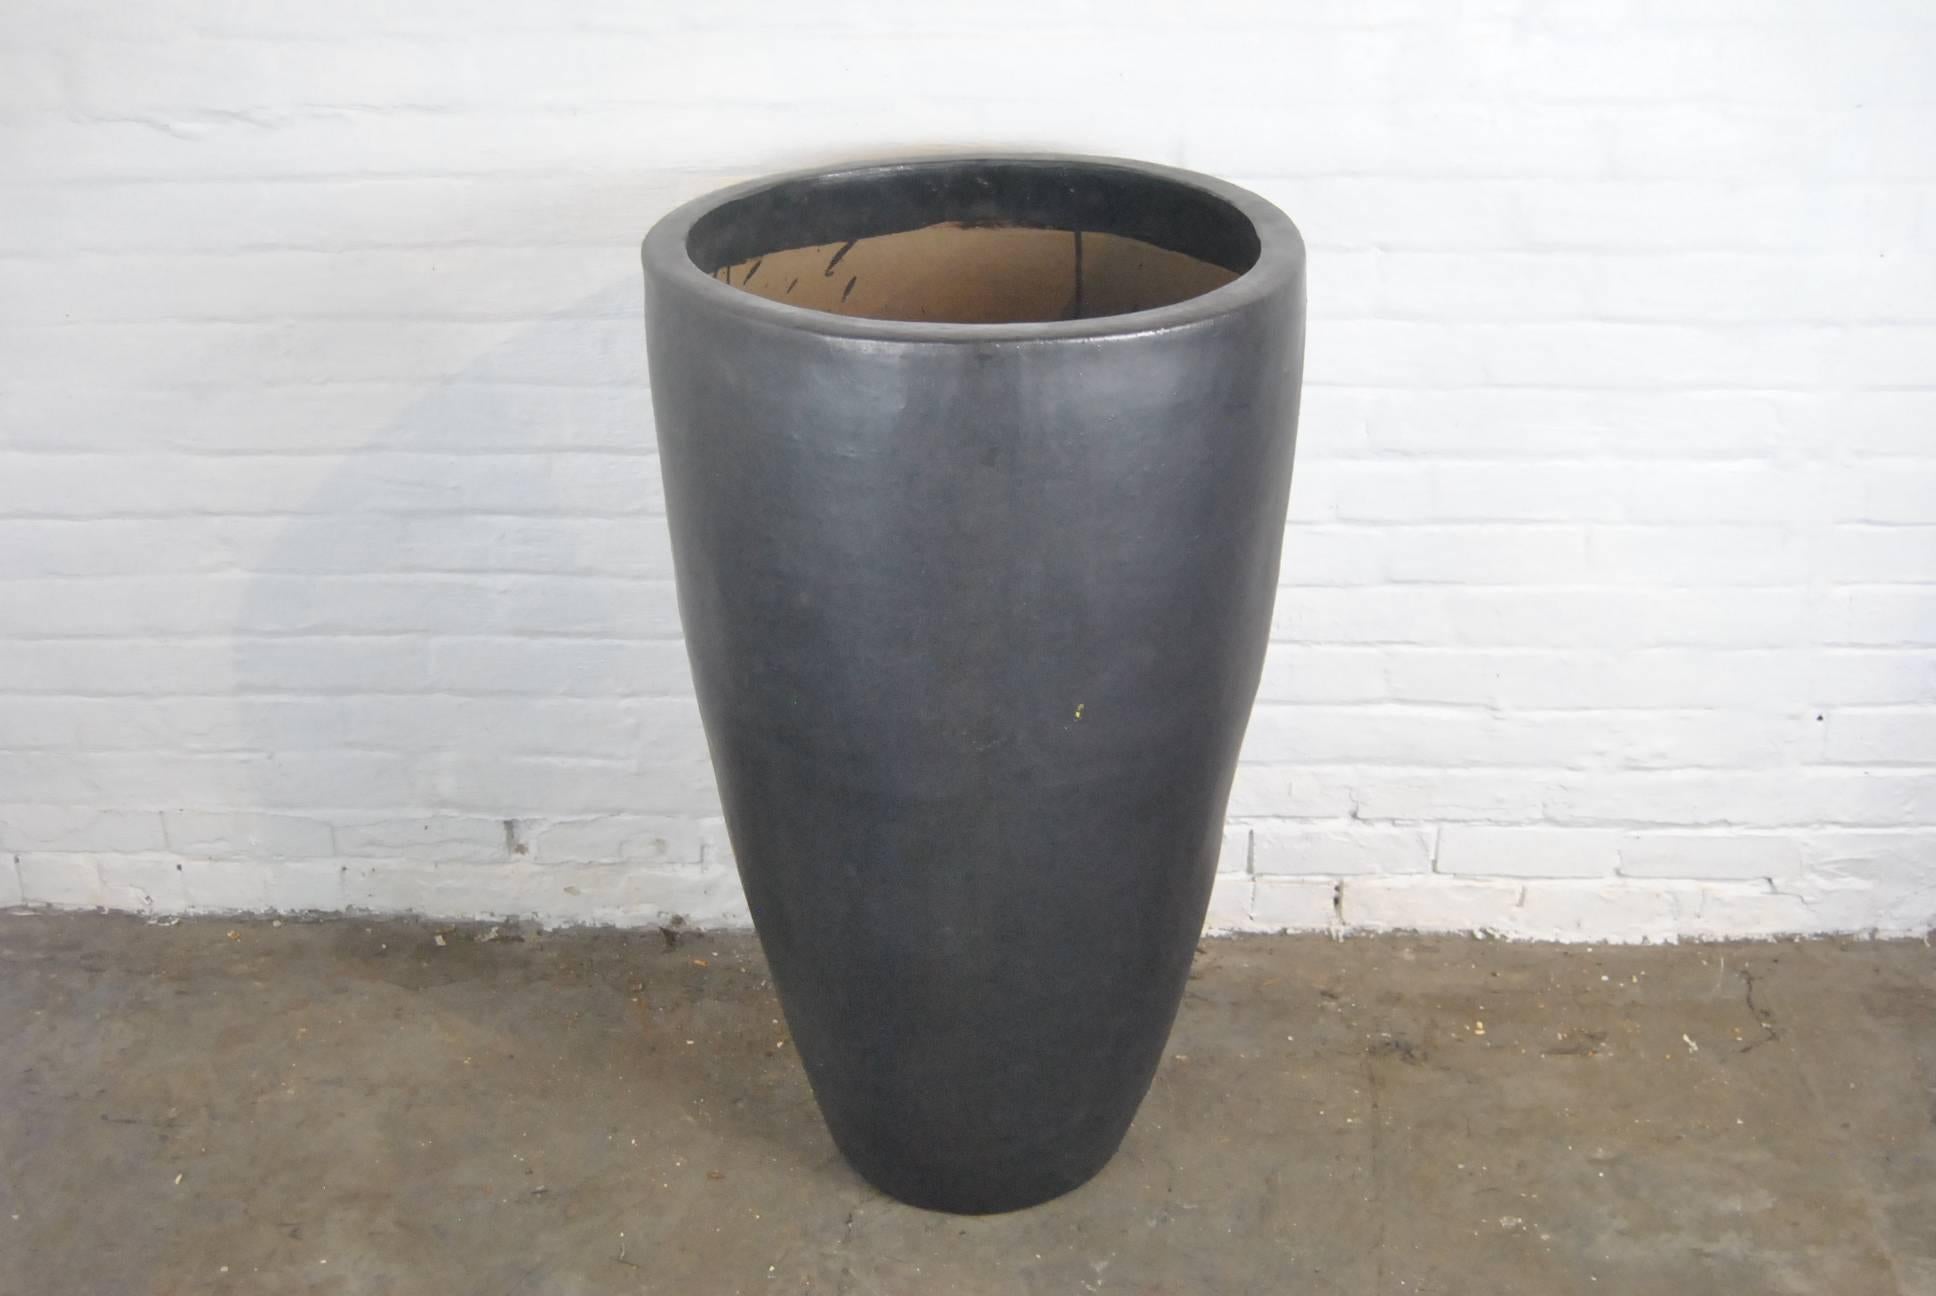 A pair of architectural Asian style indoor / outdoor matte glazed gunmetal planter. 
 Very large-scale. Good condition with rustic imperfections in the glaze that adds to the character. Very heavy. Measures: 38" tall x 22" in diameter.